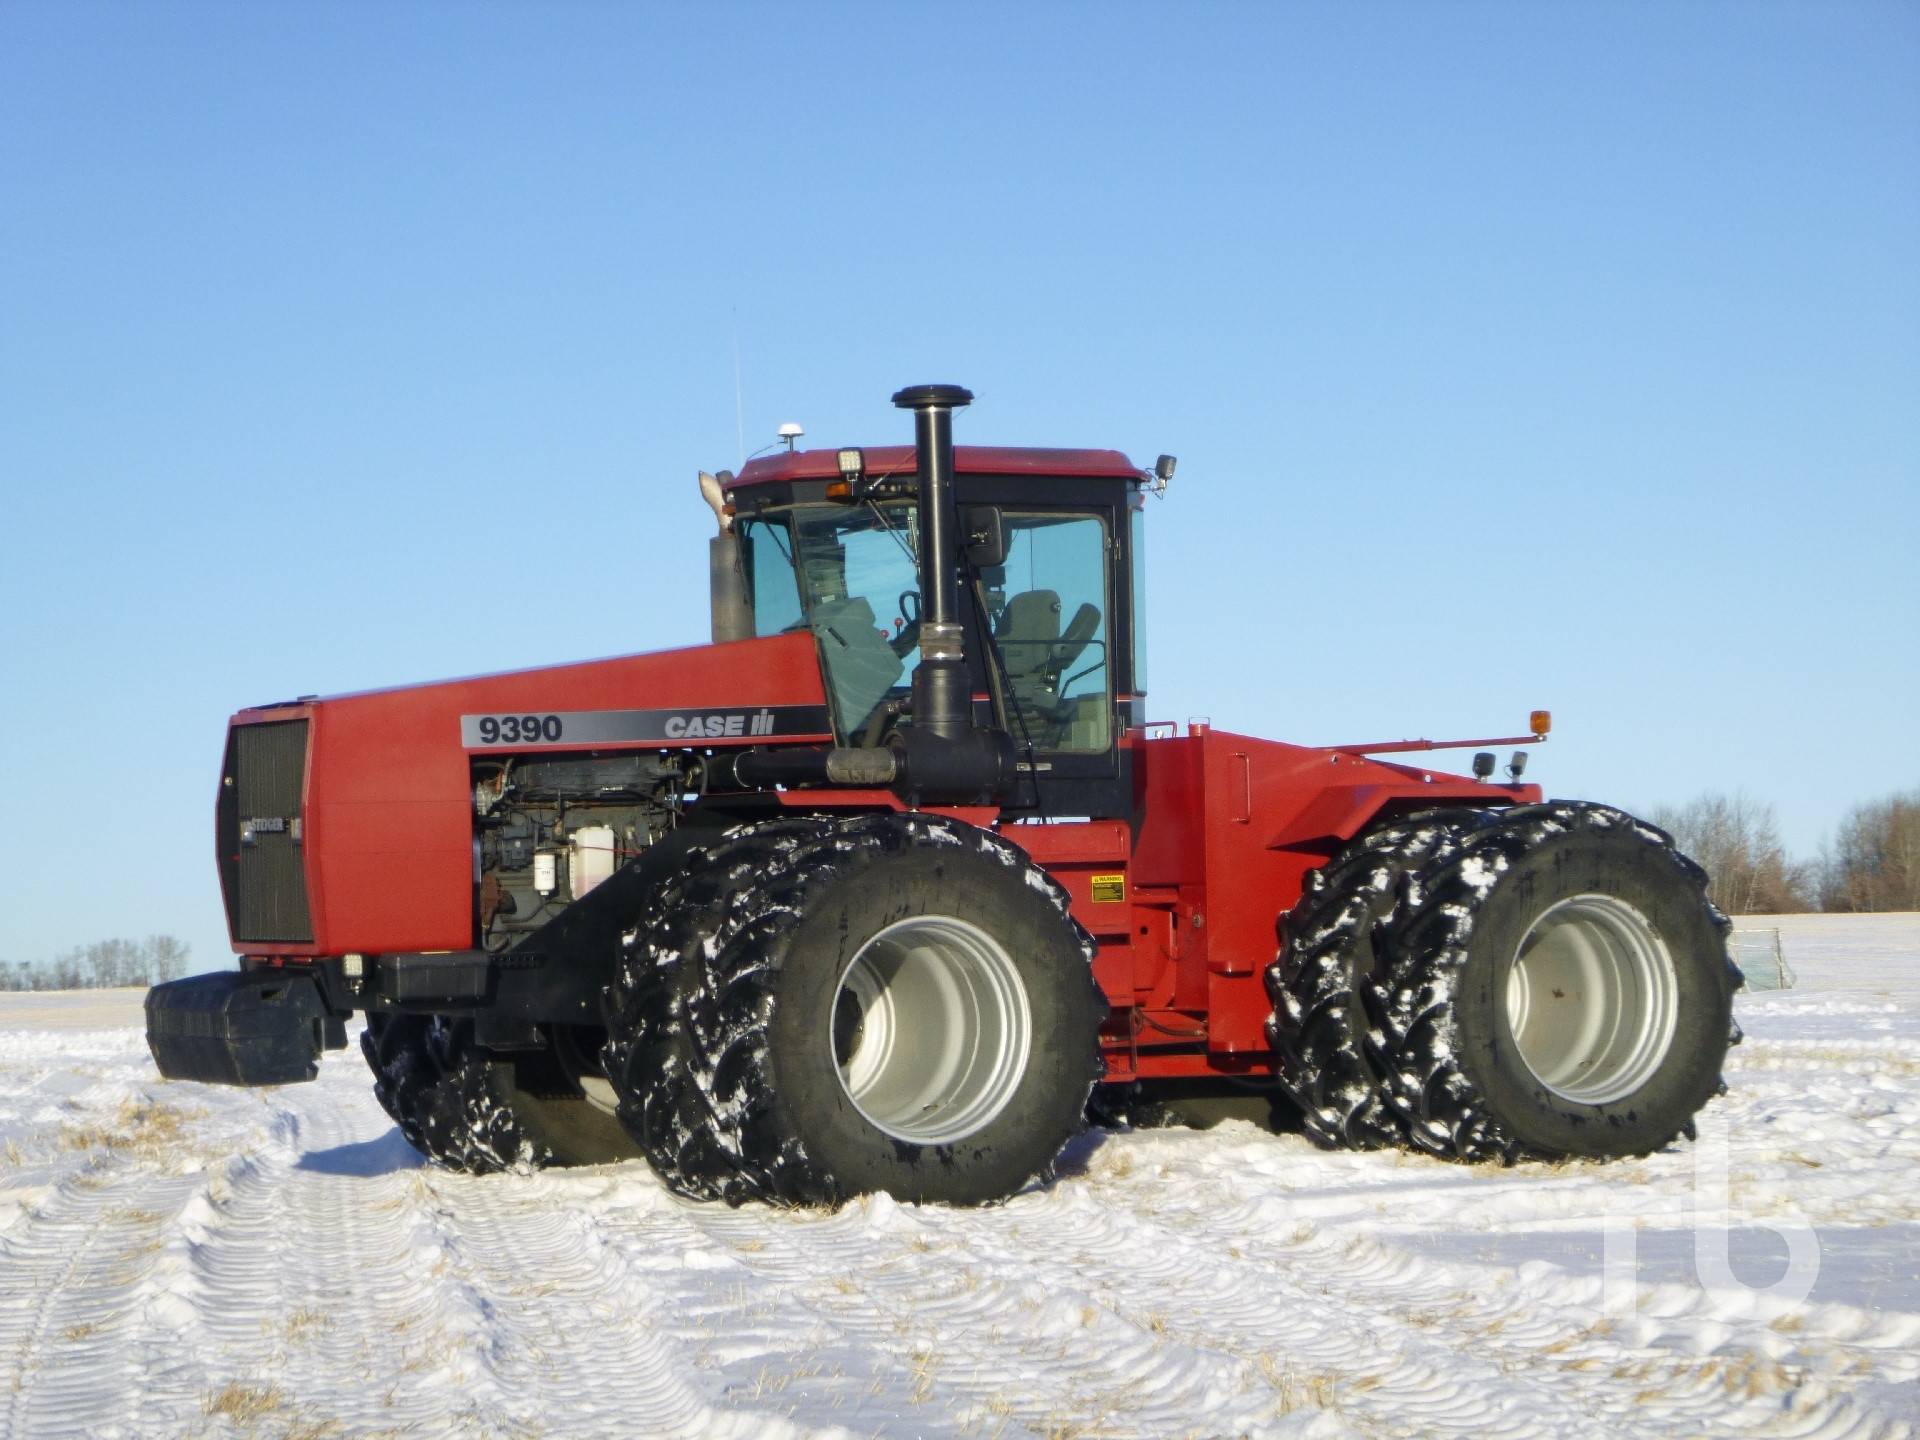 1997 Case IH 9390 tractor